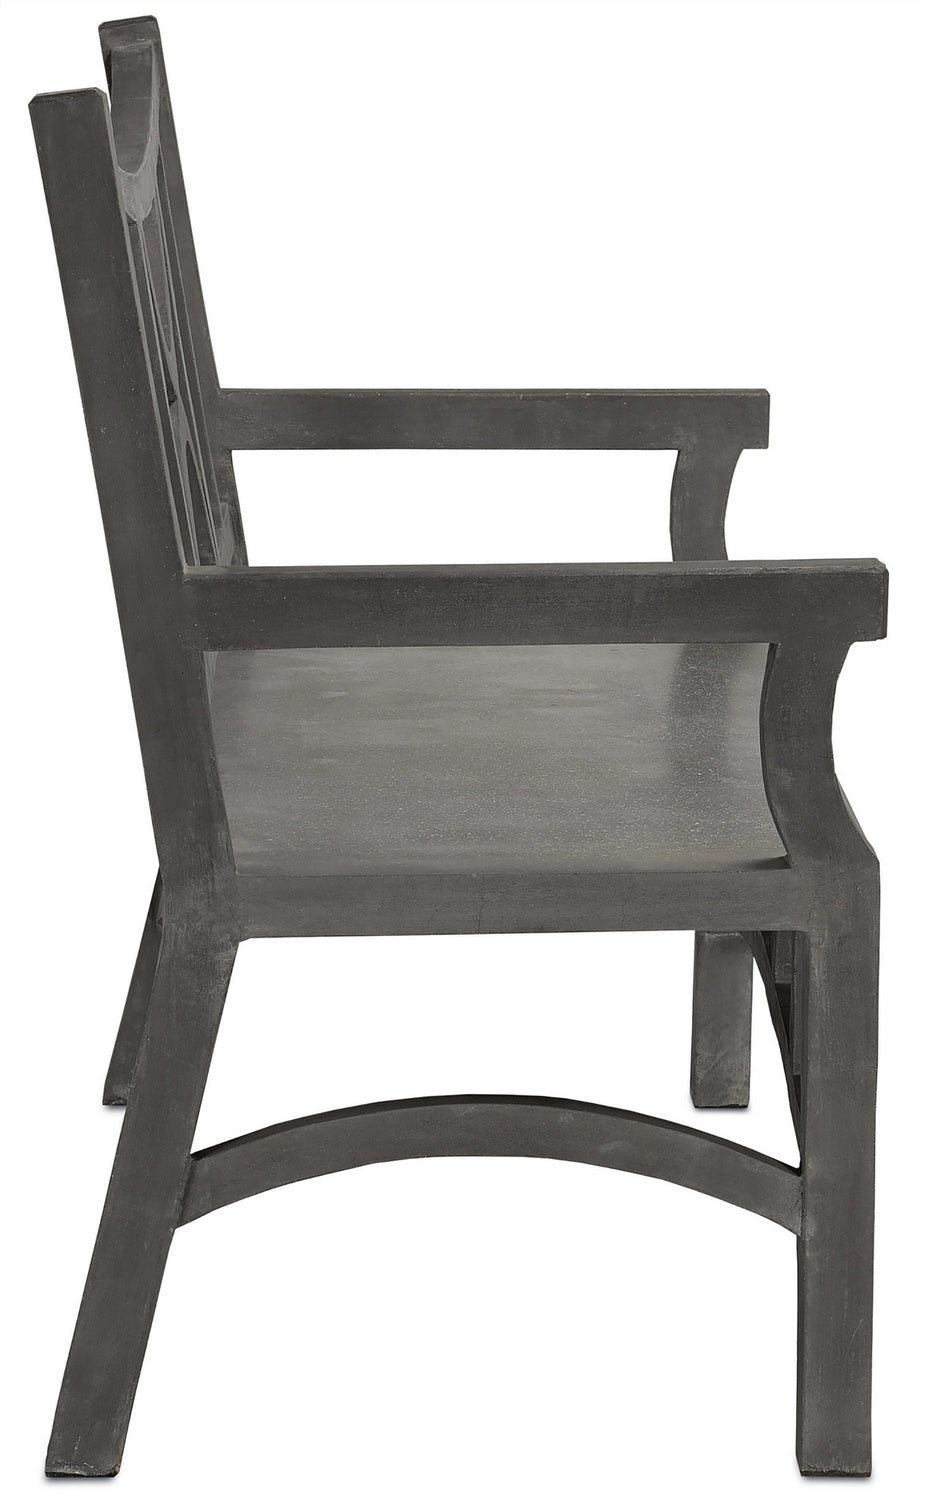 Bench from the Colesden collection in Dark Gray/Faux Bois finish